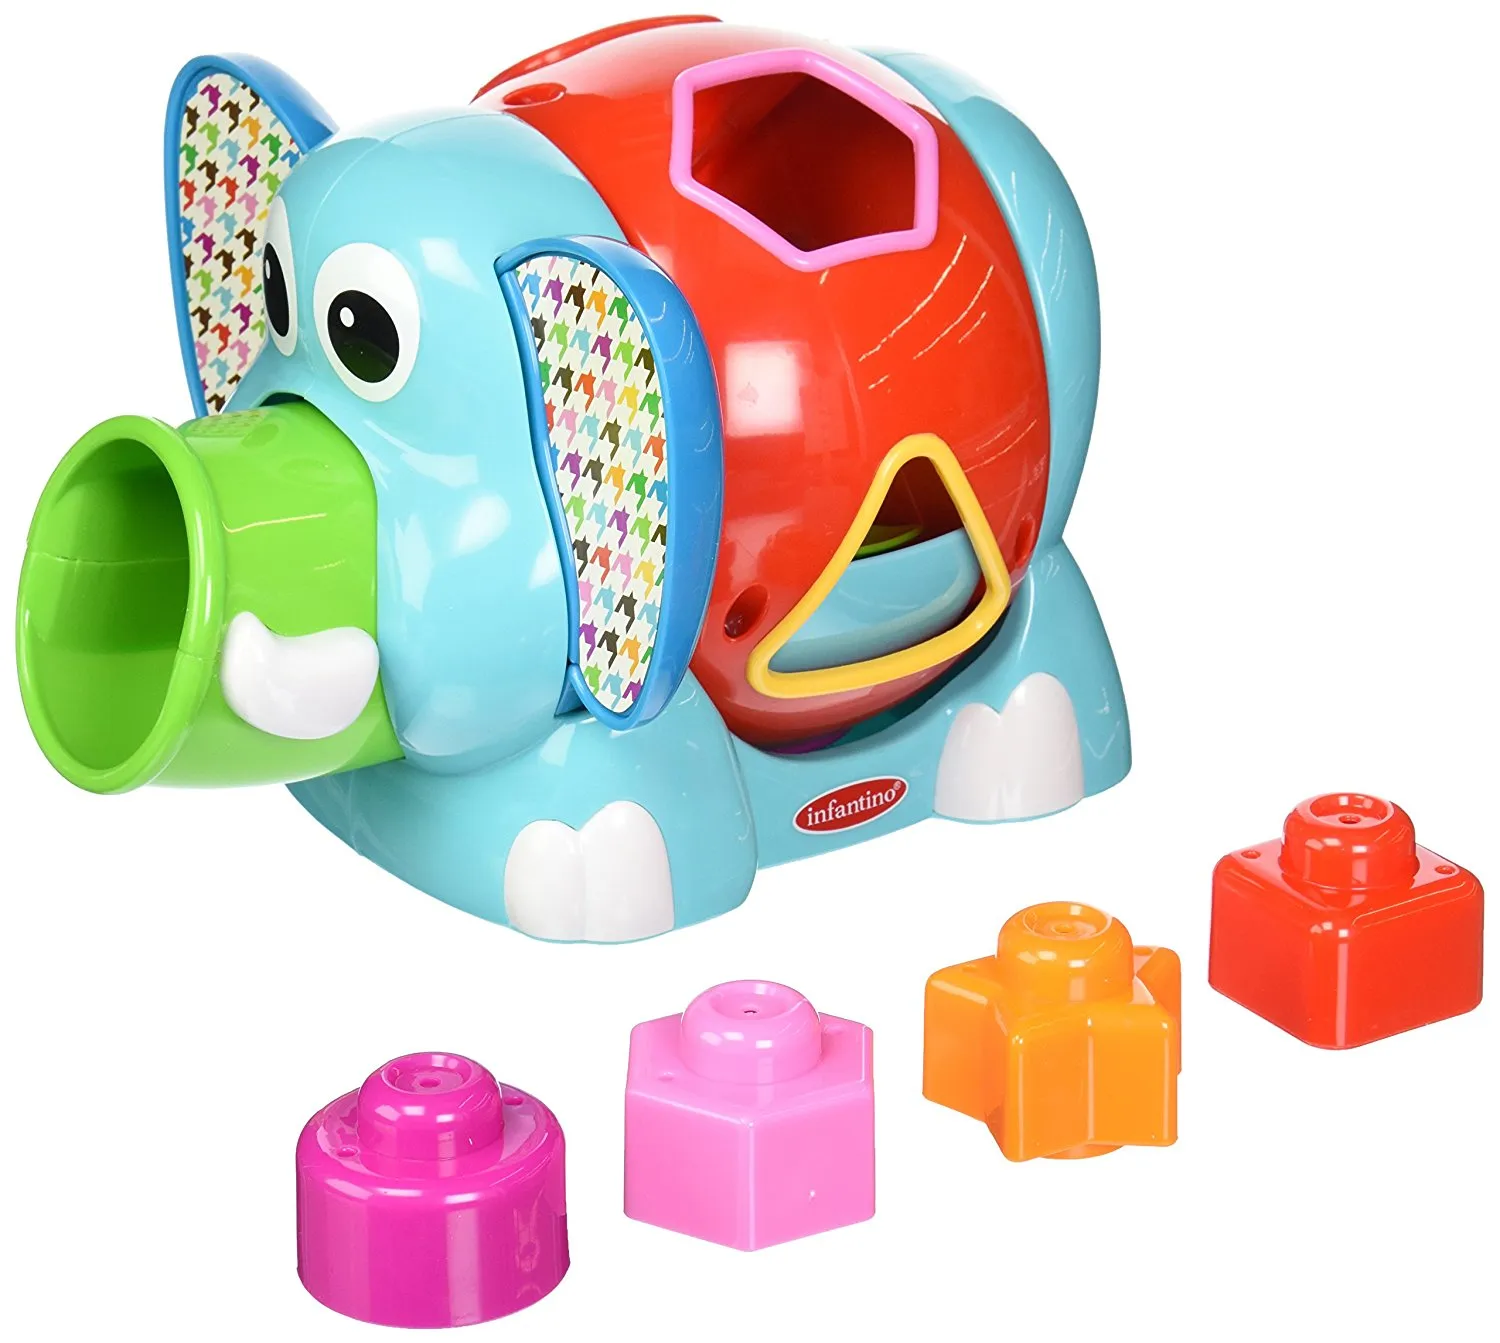 The Best Developmentally Appropriate Toys for 1-3 Year Olds